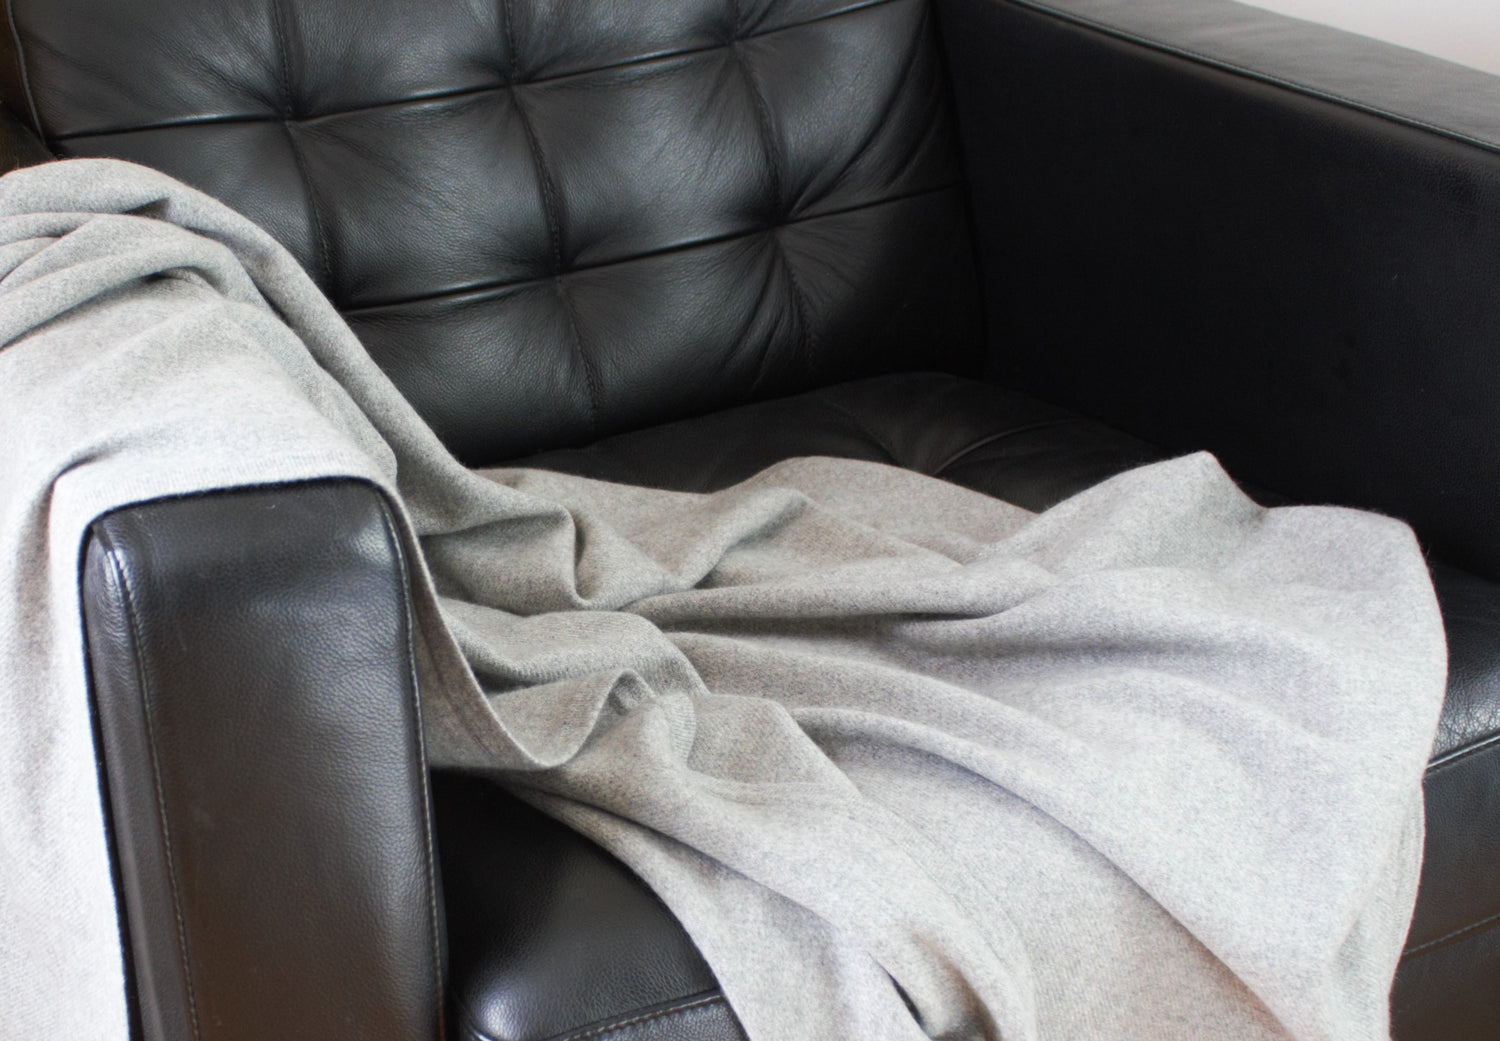 Gray_Blanket_on_Chair_Cropped_-_Copy